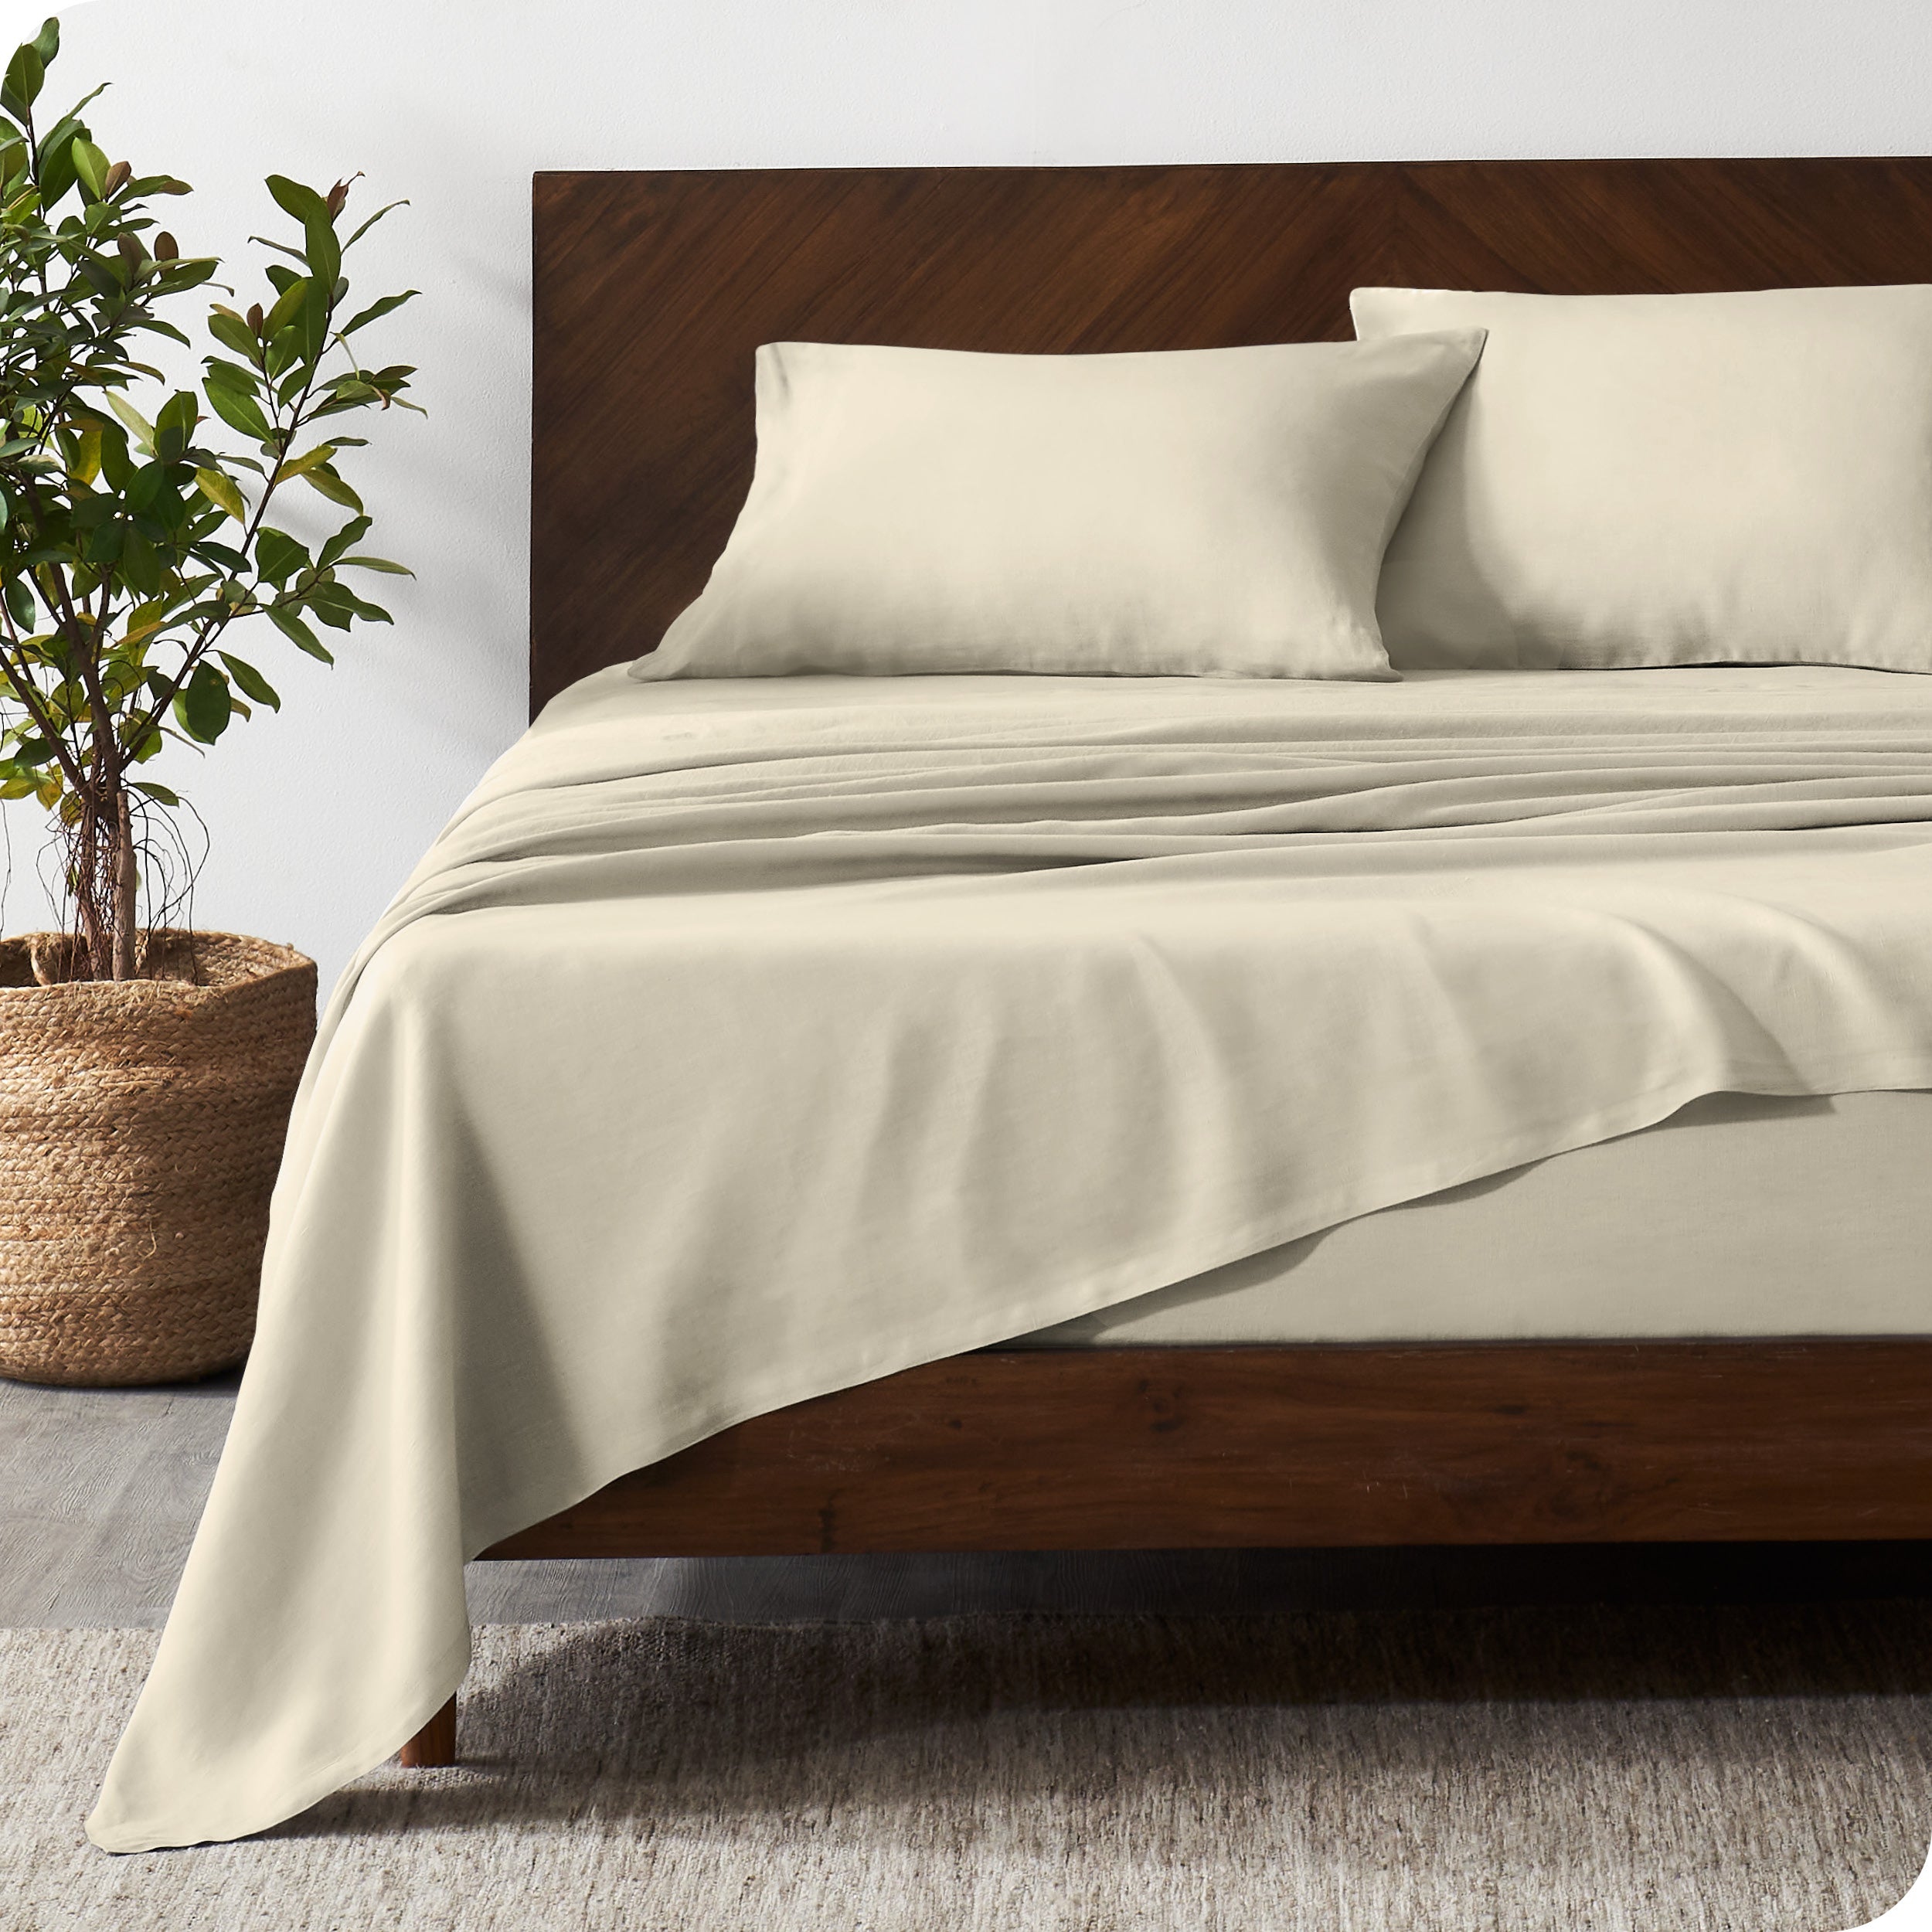 Dark wooden bed frame with natural color linen sheets on the mattress